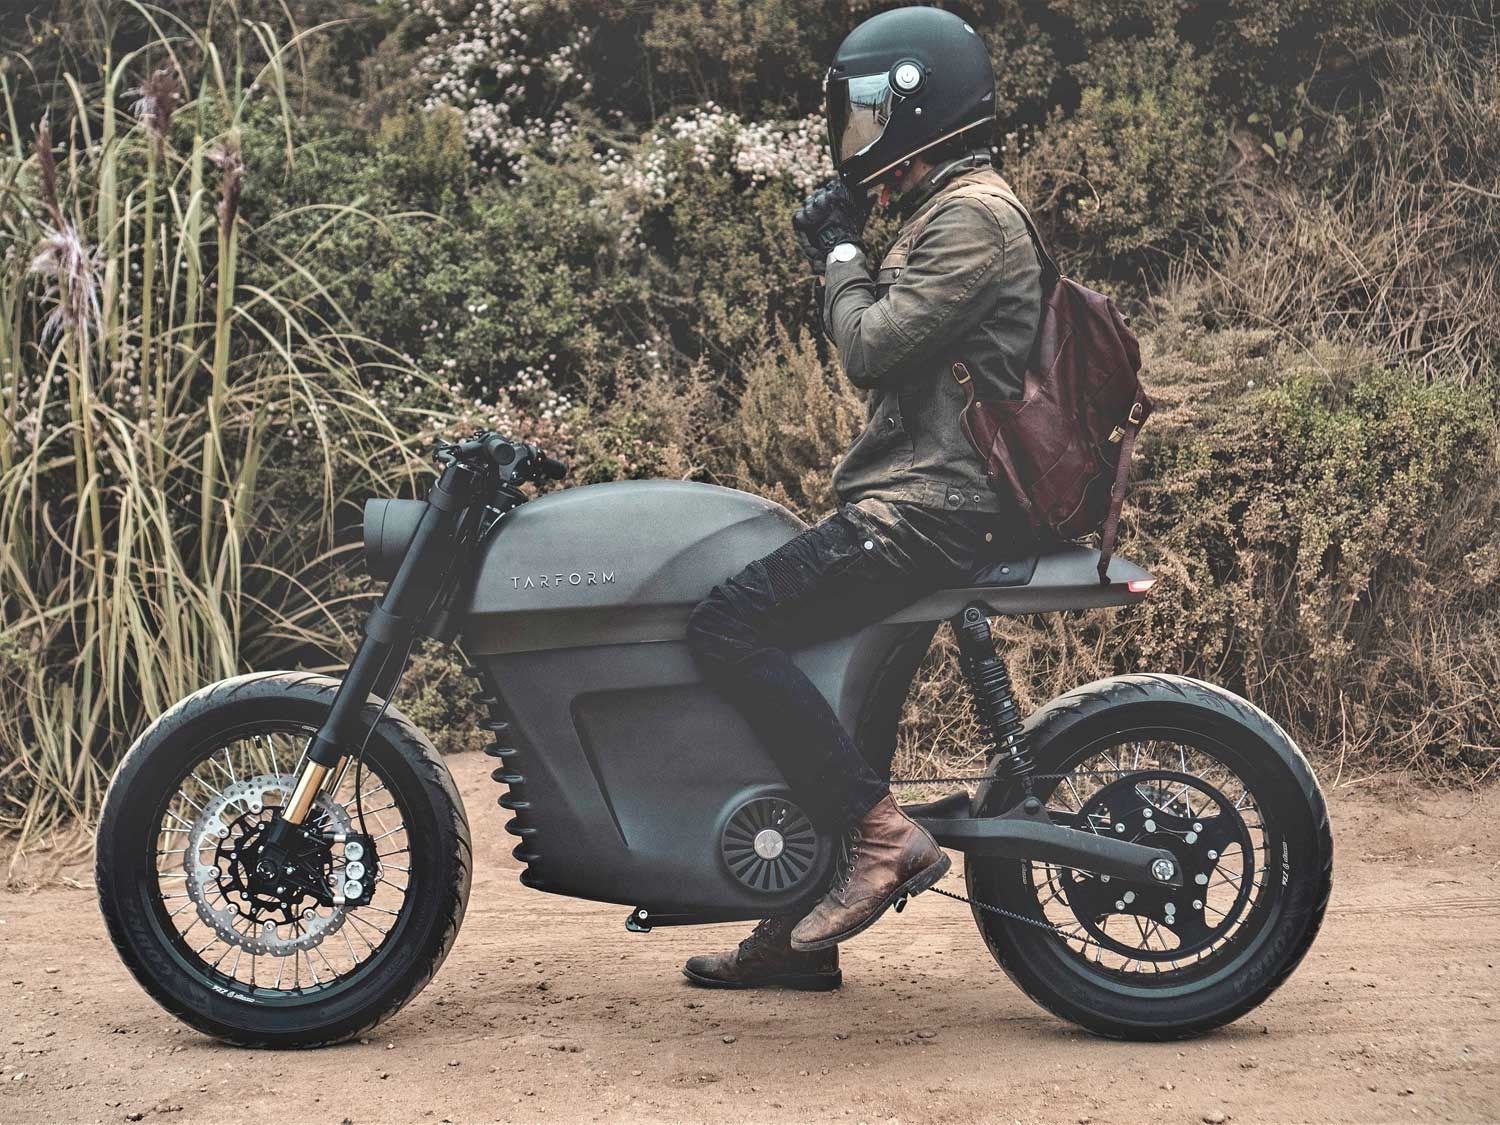 The Tarform Luna Electric Motorcycle on a dirt road.